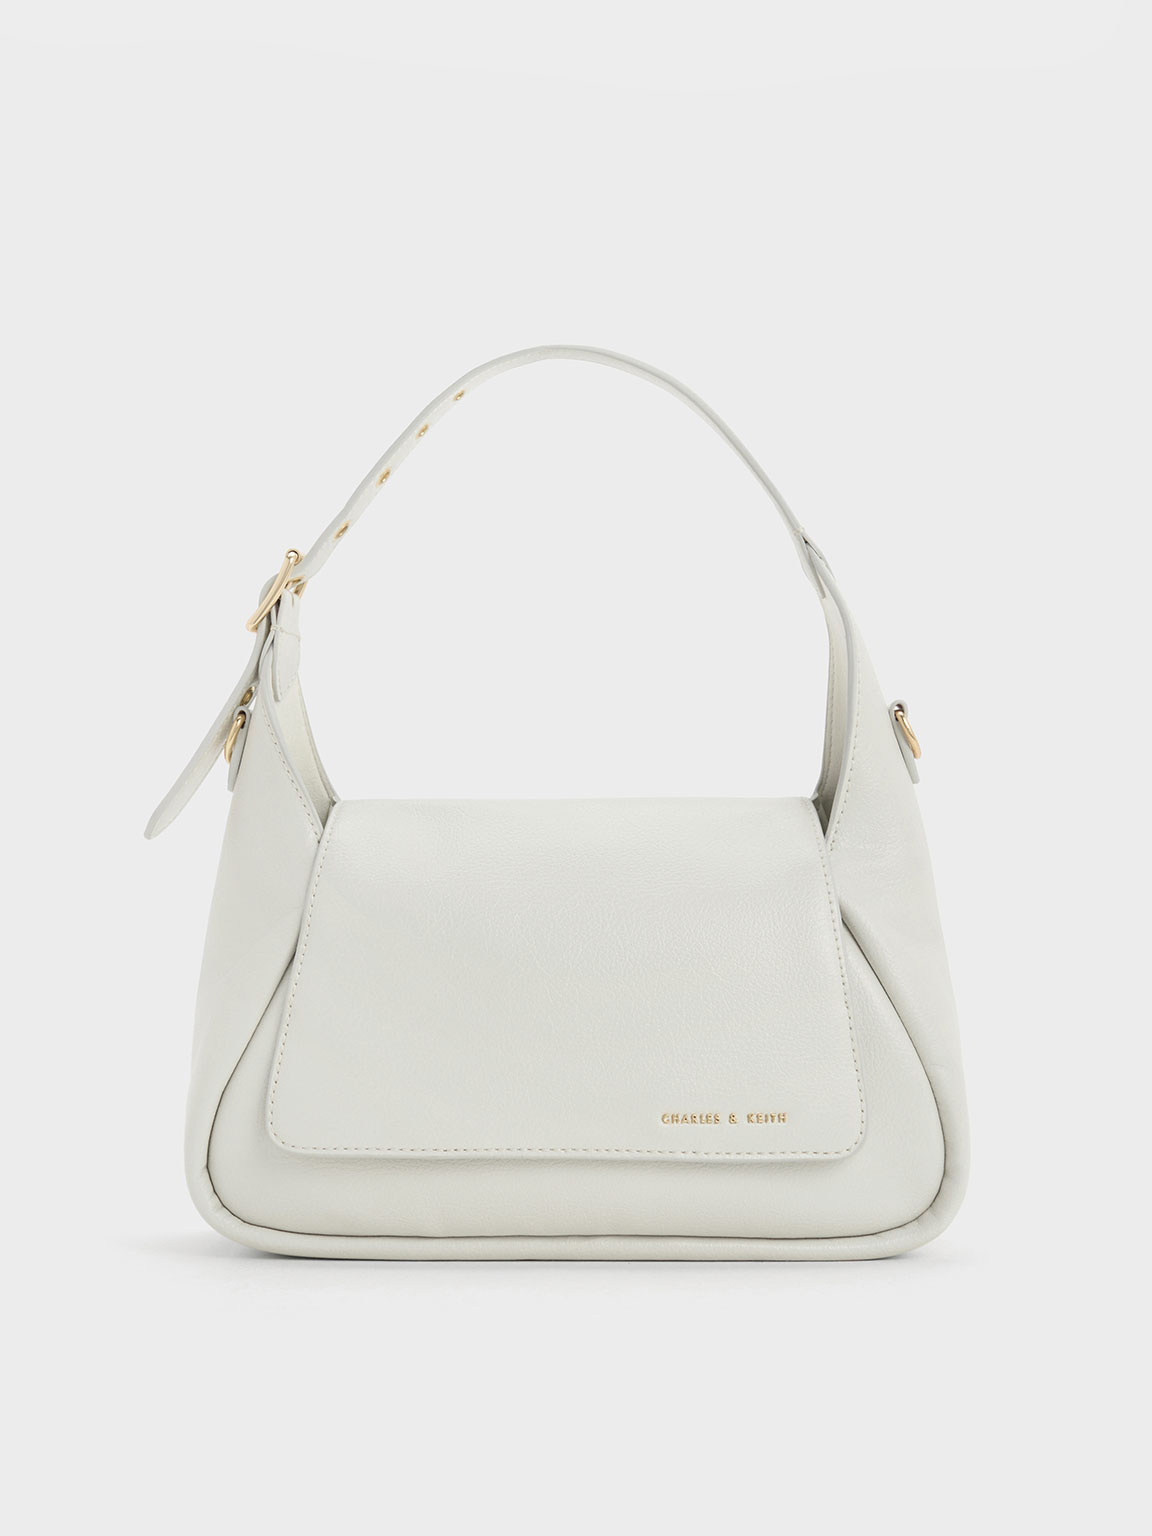 Charles & Keith Buzz Front Flap Hobo Bag In White